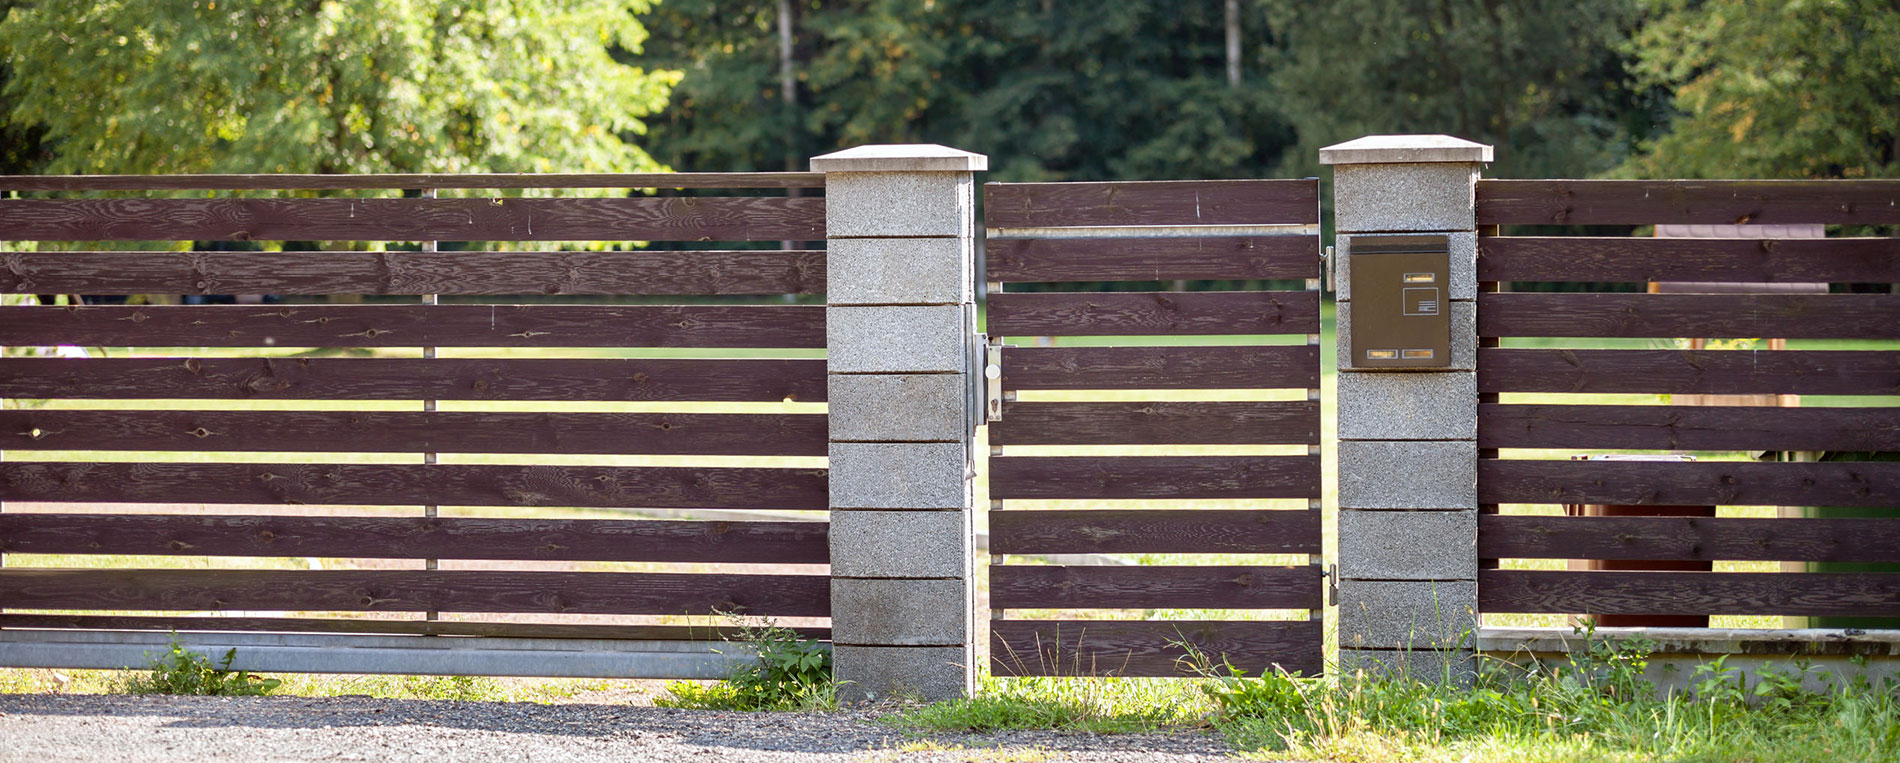 3 Common Issues with Swing Gates